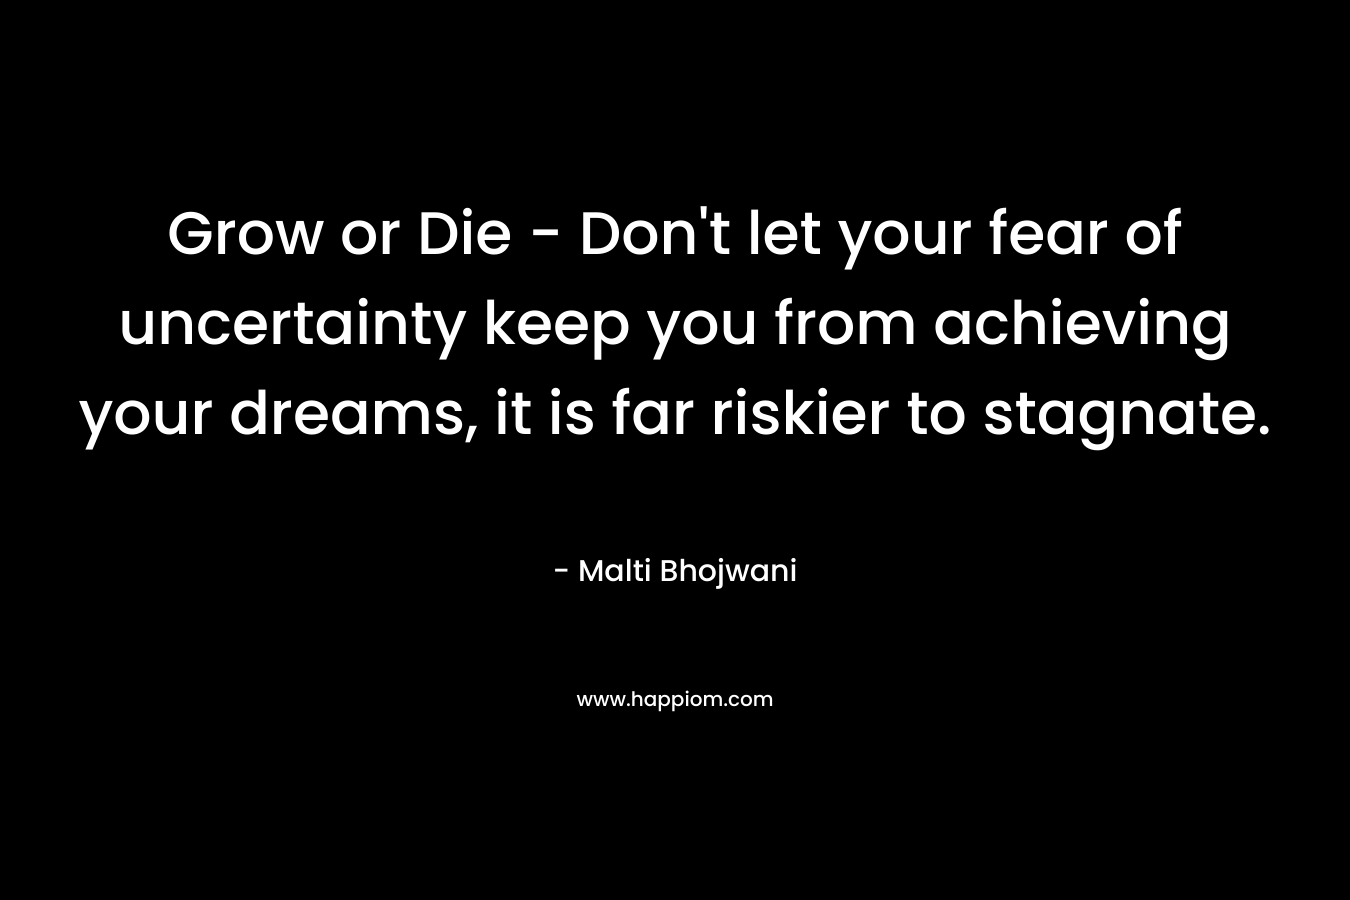 Grow or Die – Don’t let your fear of uncertainty keep you from achieving your dreams, it is far riskier to stagnate. – Malti Bhojwani